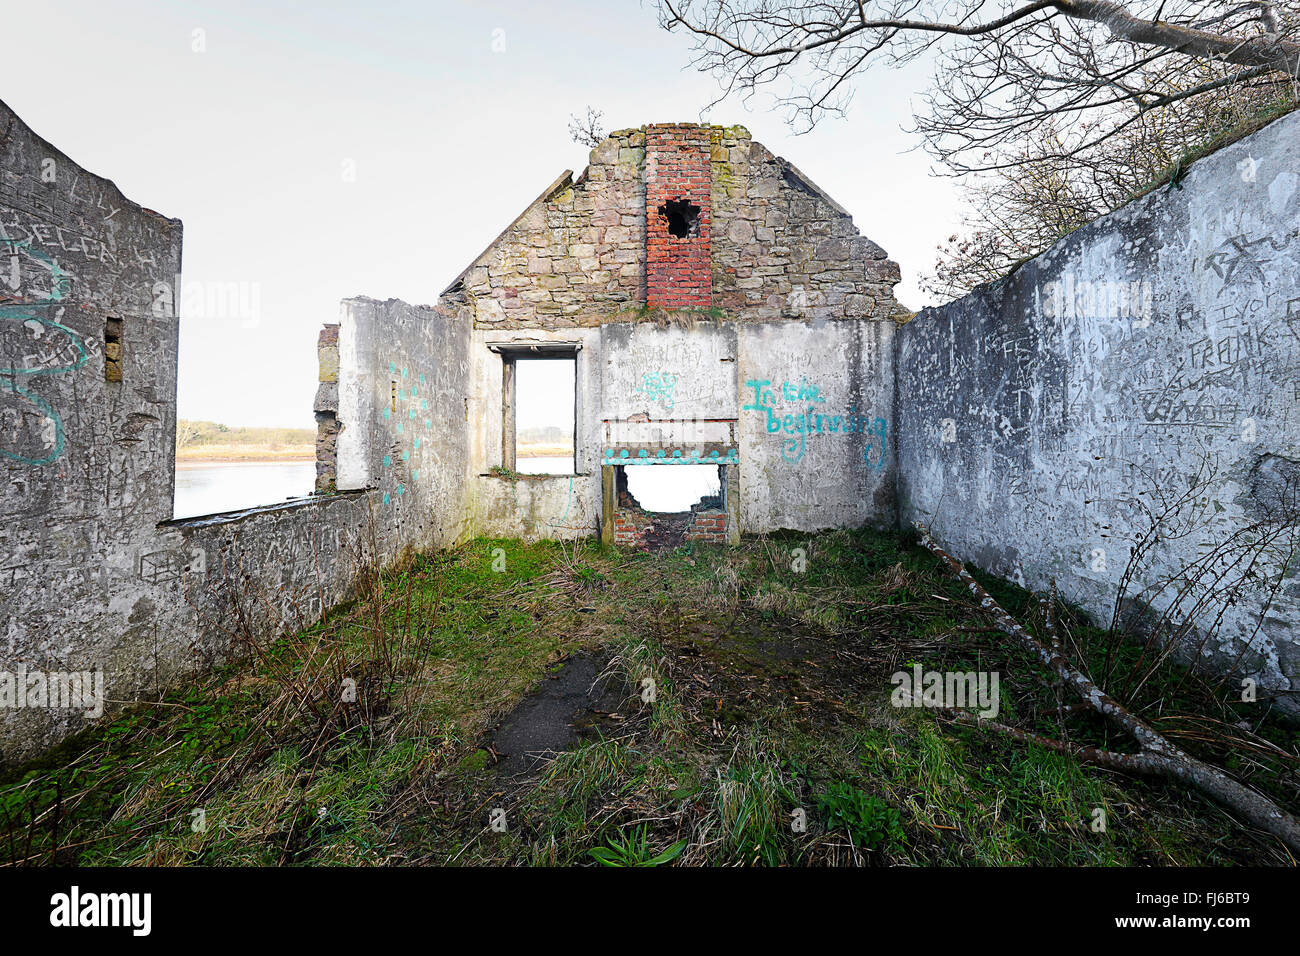 The interior of the roofless, derelict Clayhole Shiel by the river Tweed.Berwick upon Tweed. Stock Photo